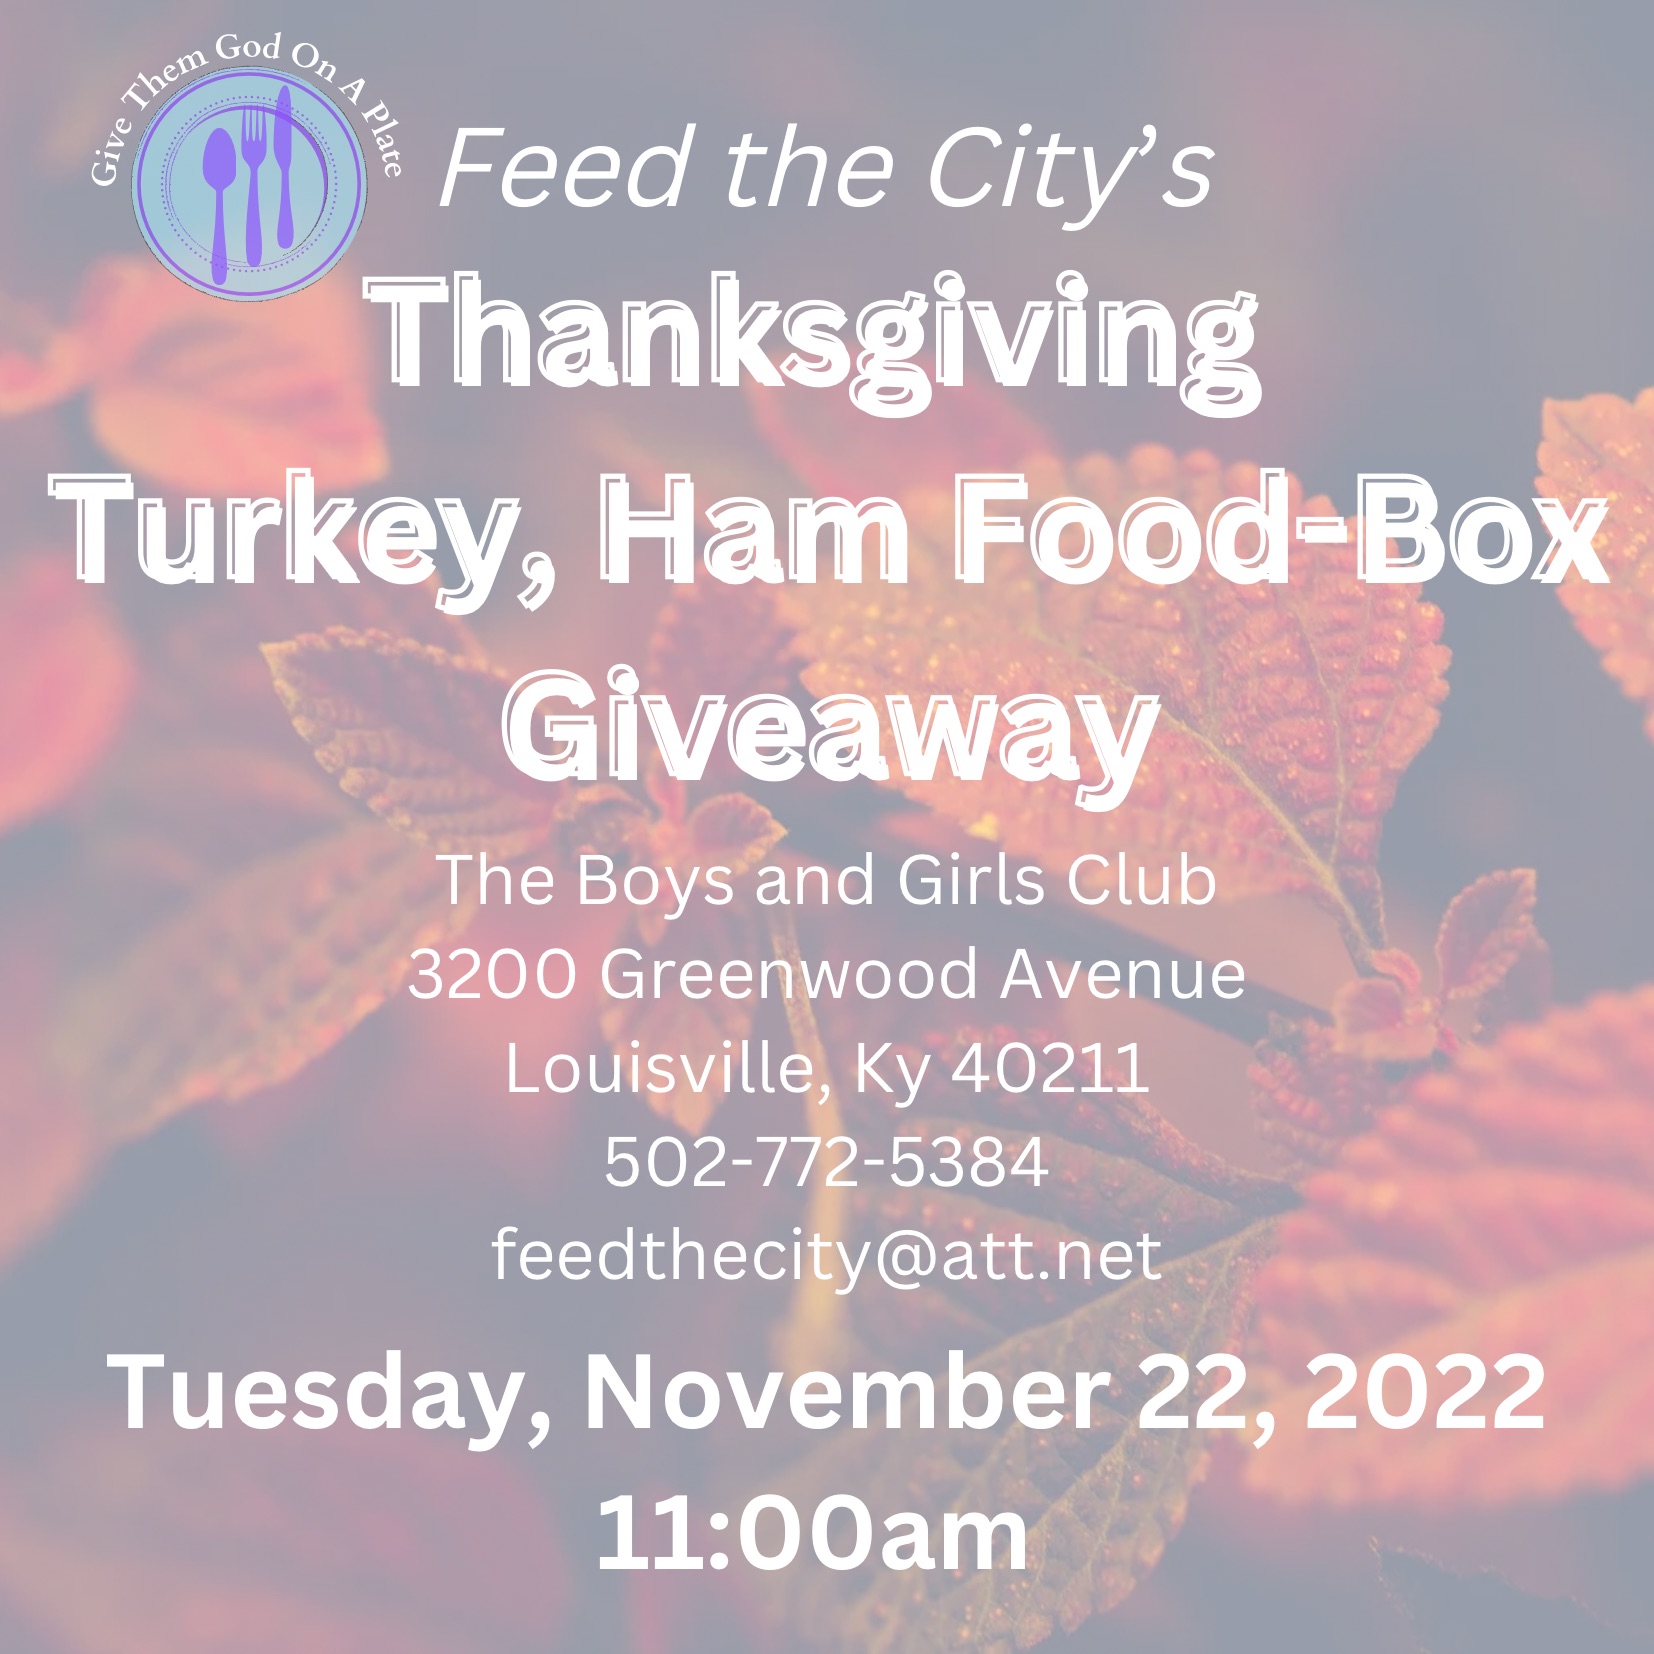 <h1 class="tribe-events-single-event-title">Feed the City’s Thanksgiving Giveaway</h1>